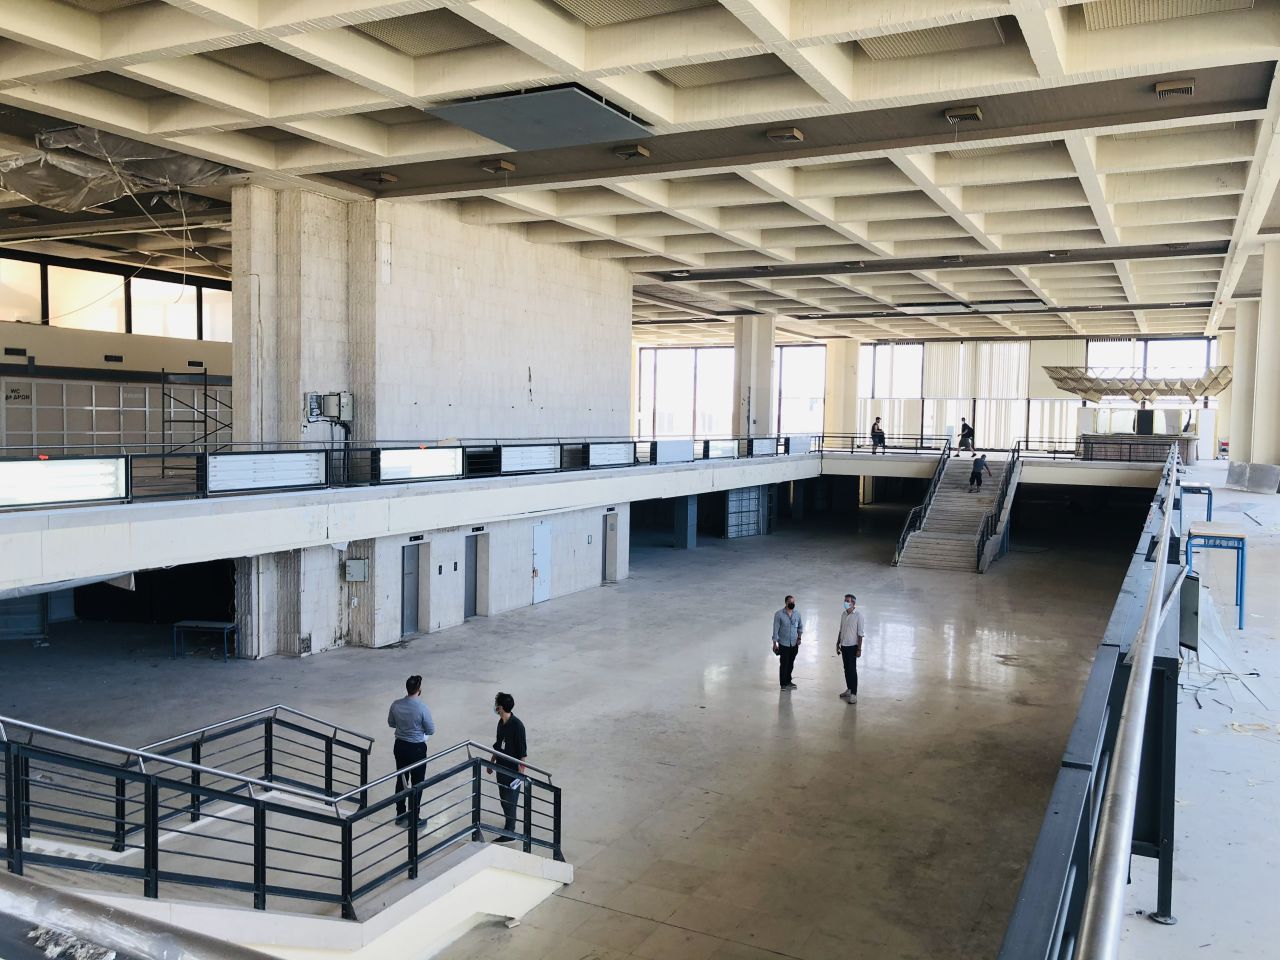 The old terminal building, designed by Eero Saarinen, will be preserved in the new development.